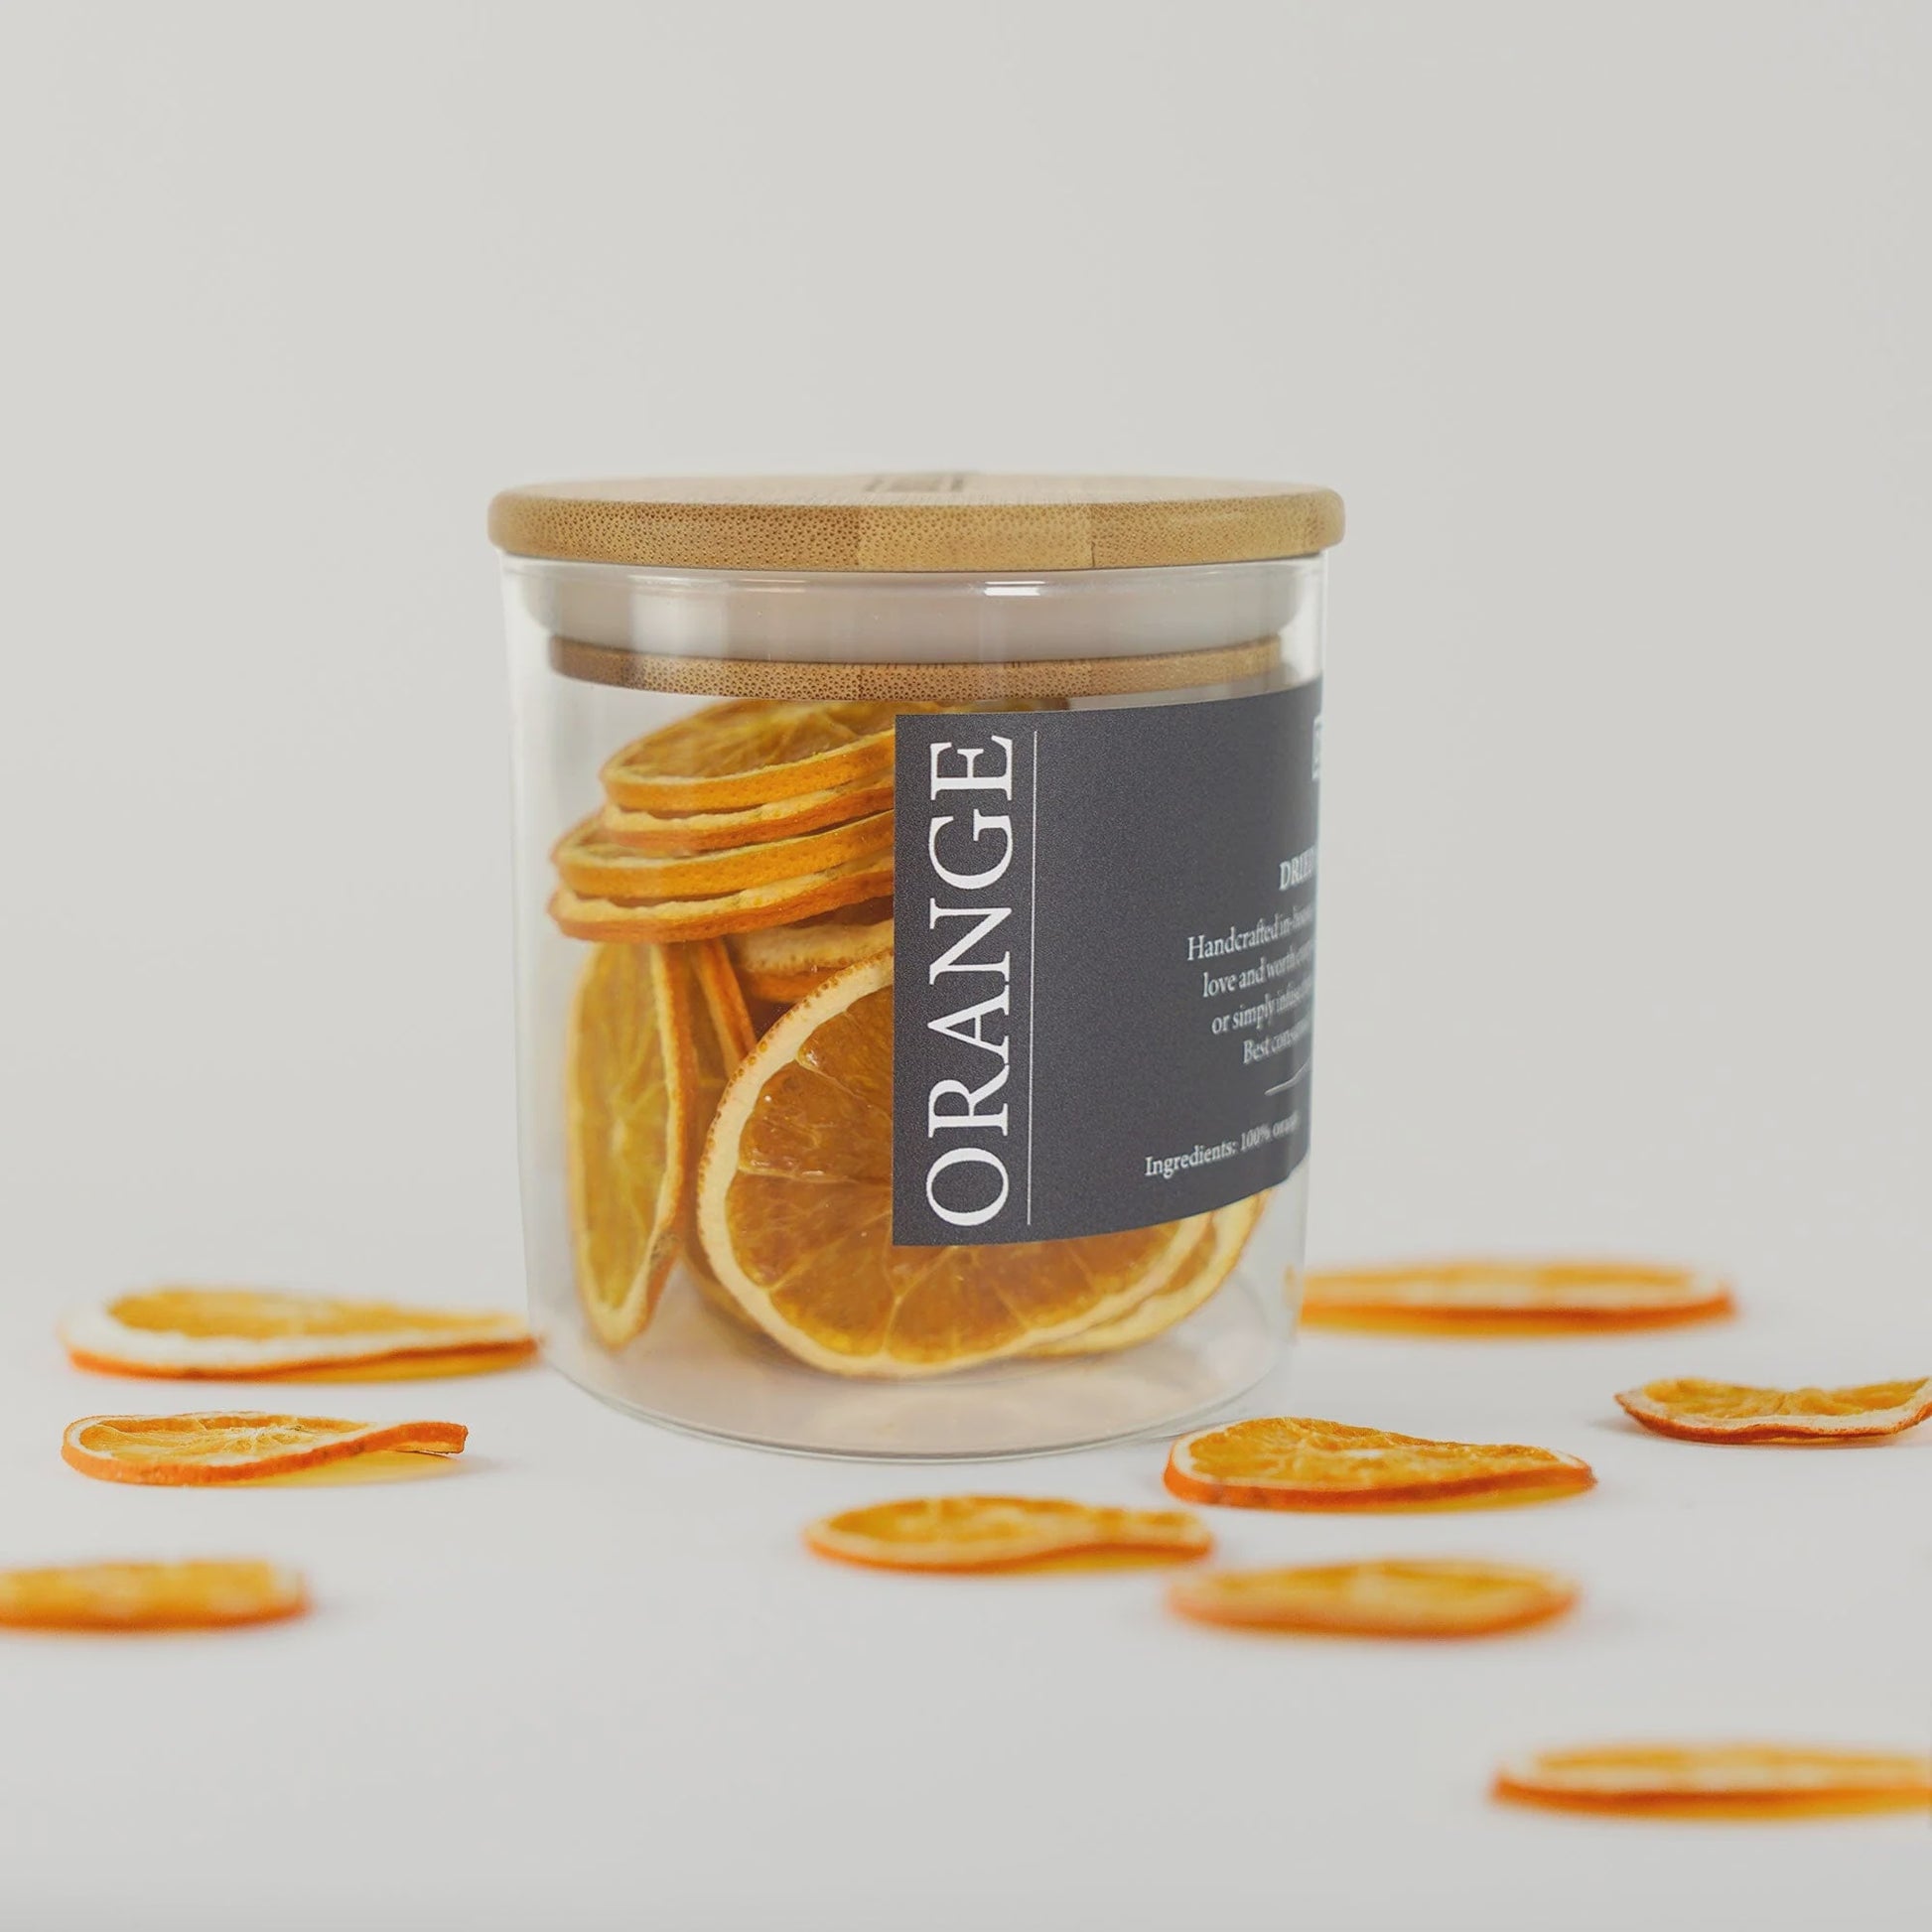 Make your favorite cocktails look and taste amazing with these 50g of dehydrated orange slices! Dried Orange Cocktail Garnishes in a jar adds a natural sweetness and accentuates the complexity of the drink. Slice into a Margarita, Old Fashioned, or Daiquiri to make a show-stopping drink! (You'll be the talk of the town.)